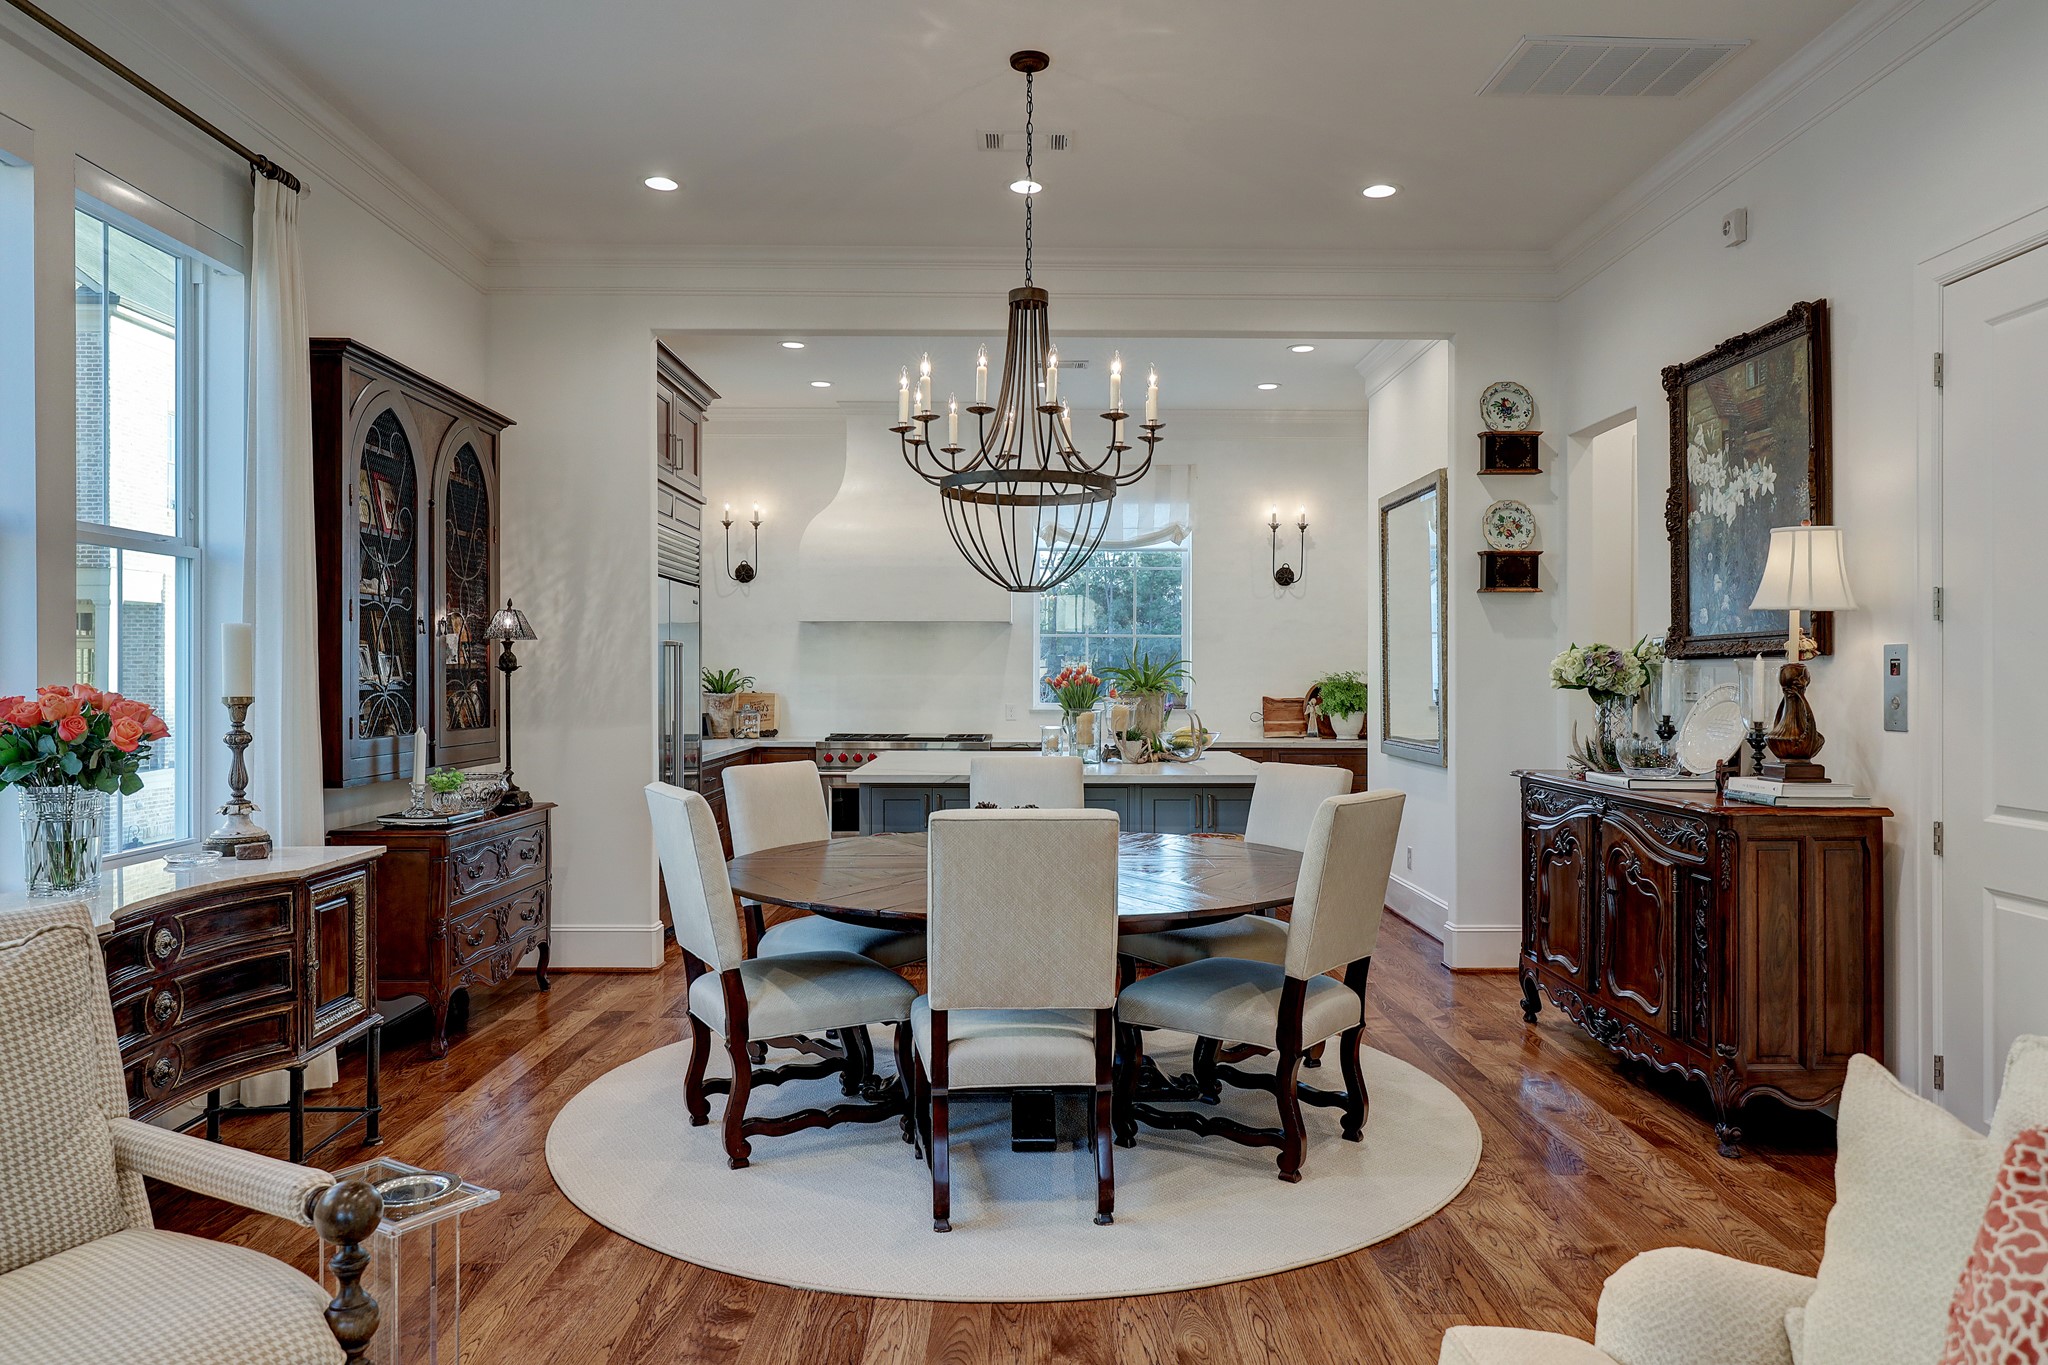 The formal dining room features custom drapes and motorized shades, sophisticated recessed lighting, Julia Neill chandelier, and double crown molding.